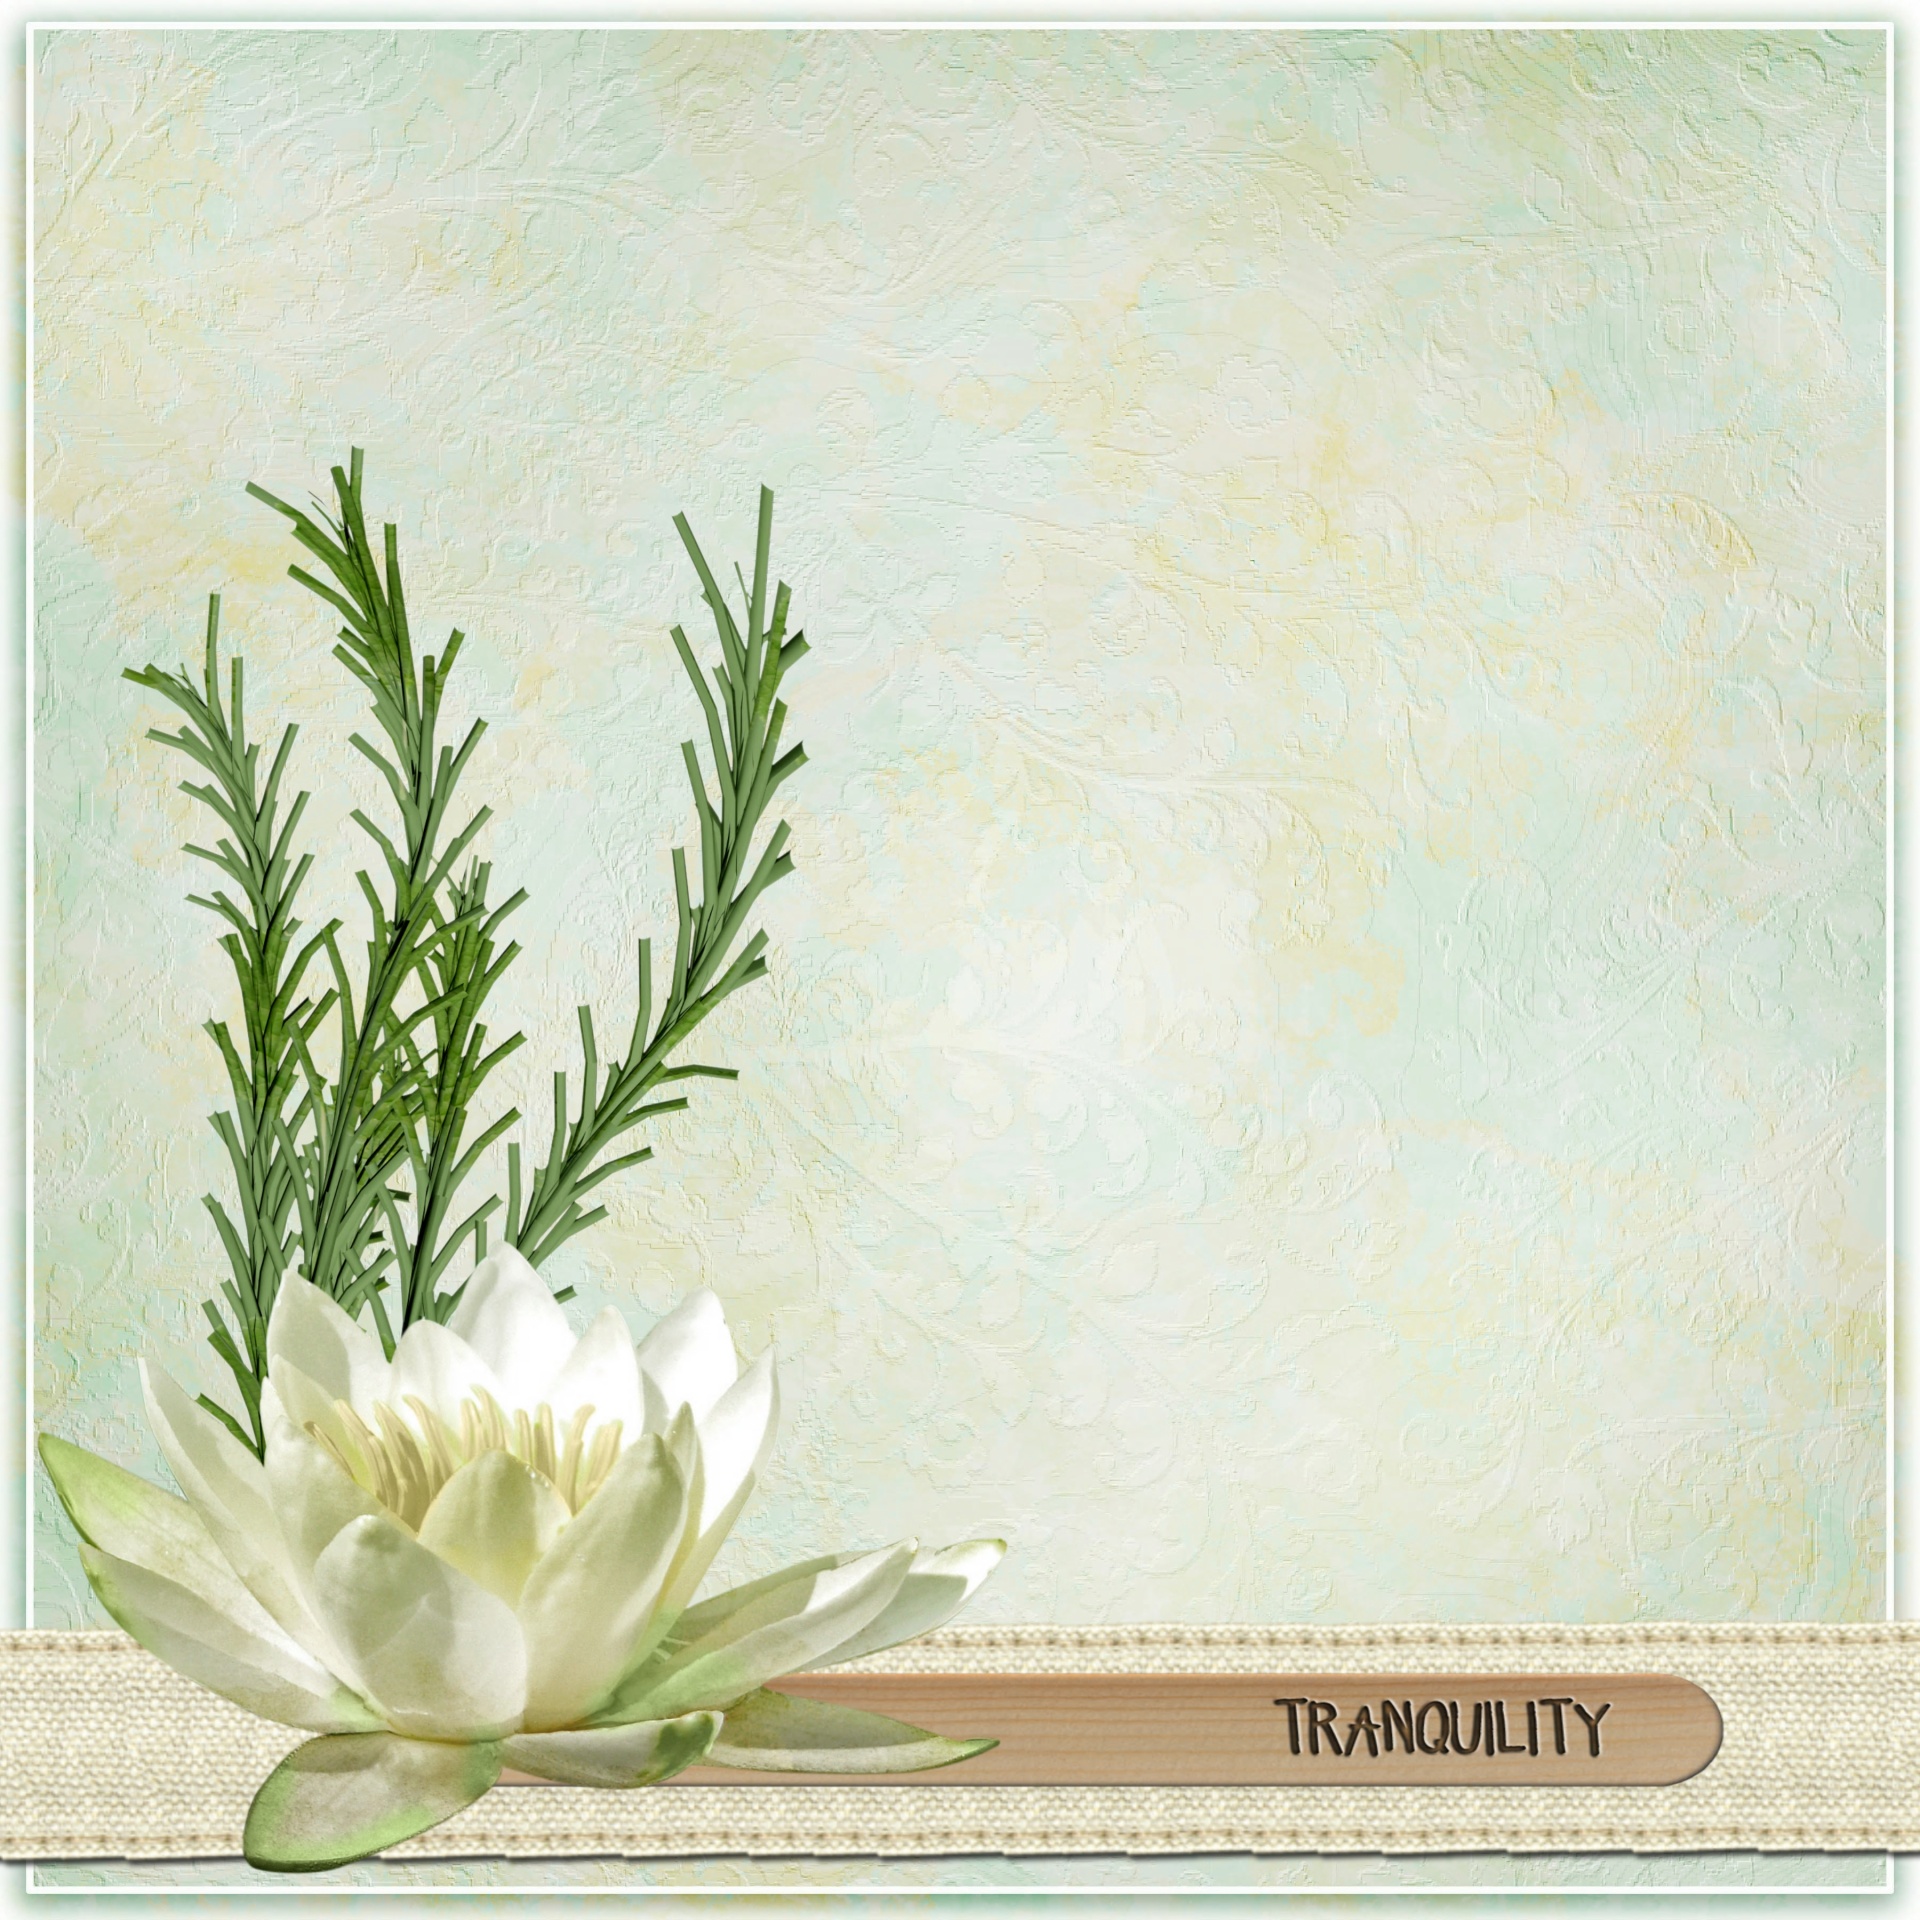 Lotus flower Tranquility Scrapbook Page light green a beautiful pre-made design for arts and craft projects